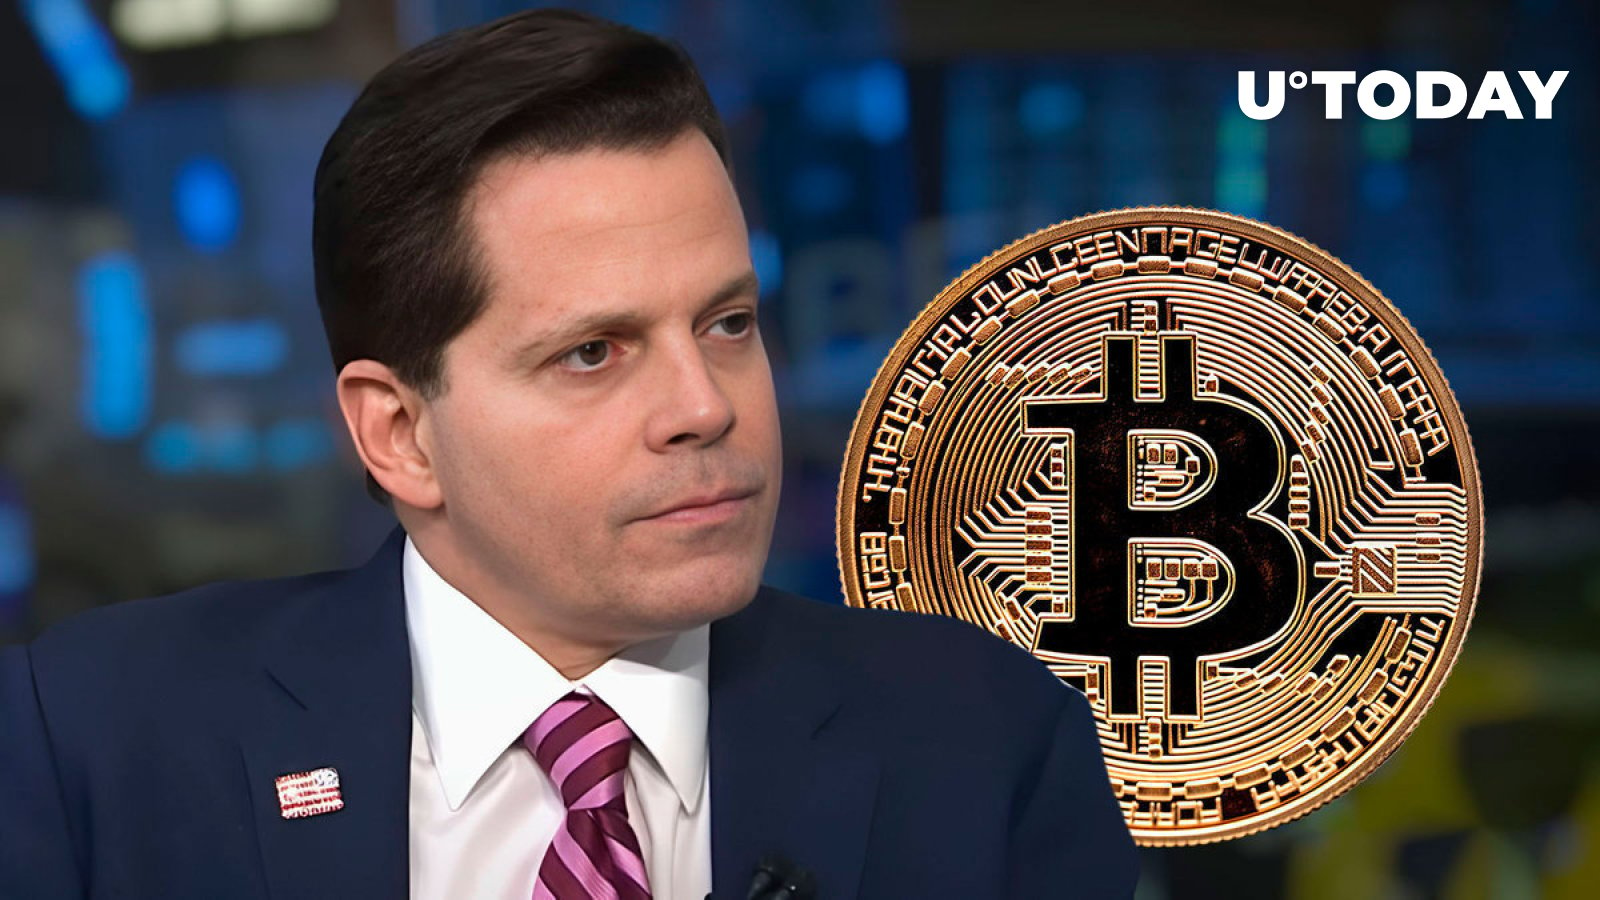 Anthony Scaramucci on Bitcoin: ‘Best-Performing Asset in World’